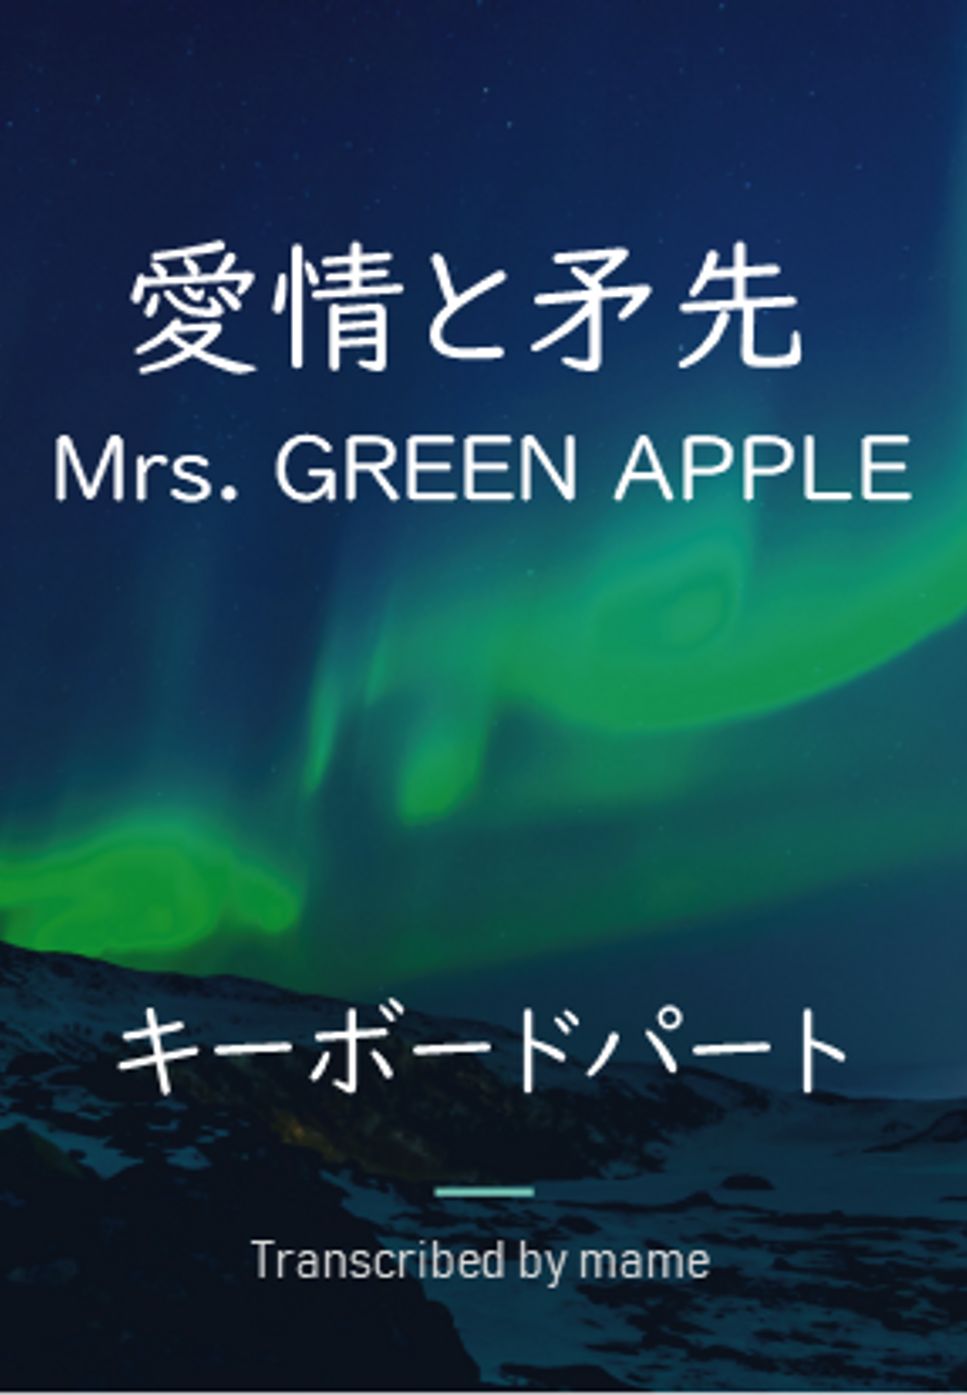 Mrs. GREEN APPLE - 愛情と矛先 (キーボードパート) by mame